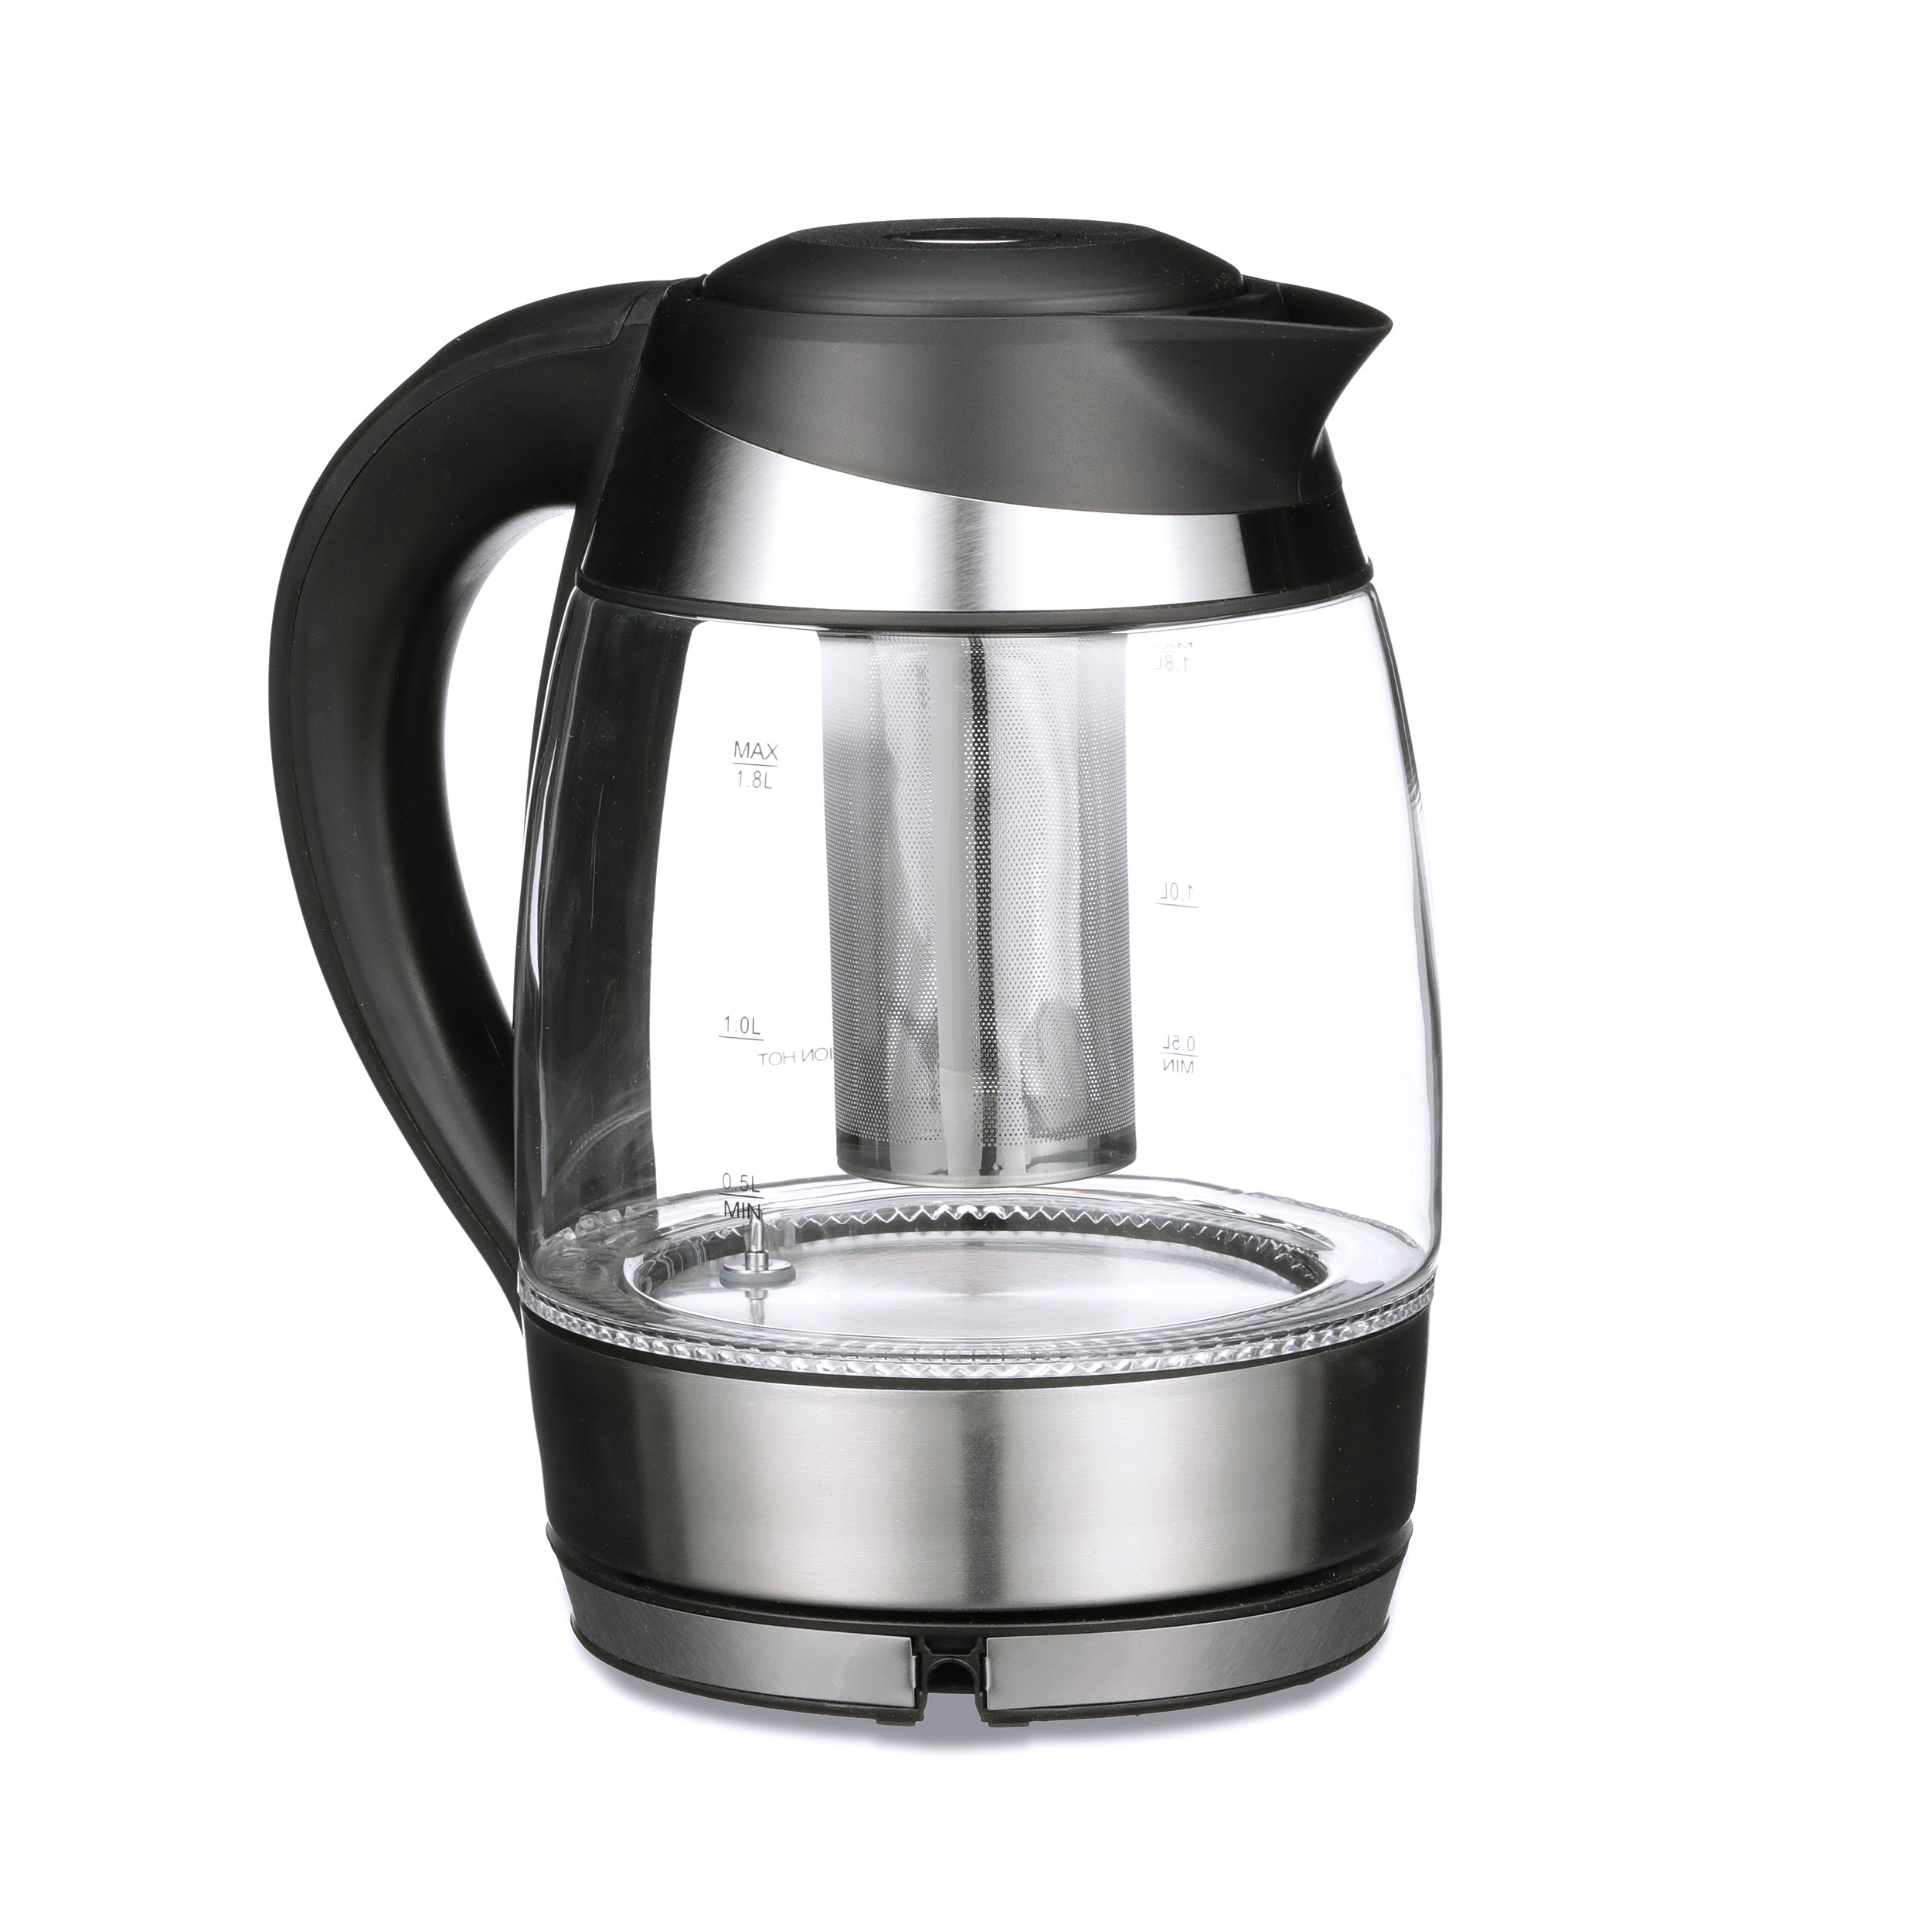 Chefman Electric Glass Kettle - Silver/Black, 1.8 L - Fry's Food Stores